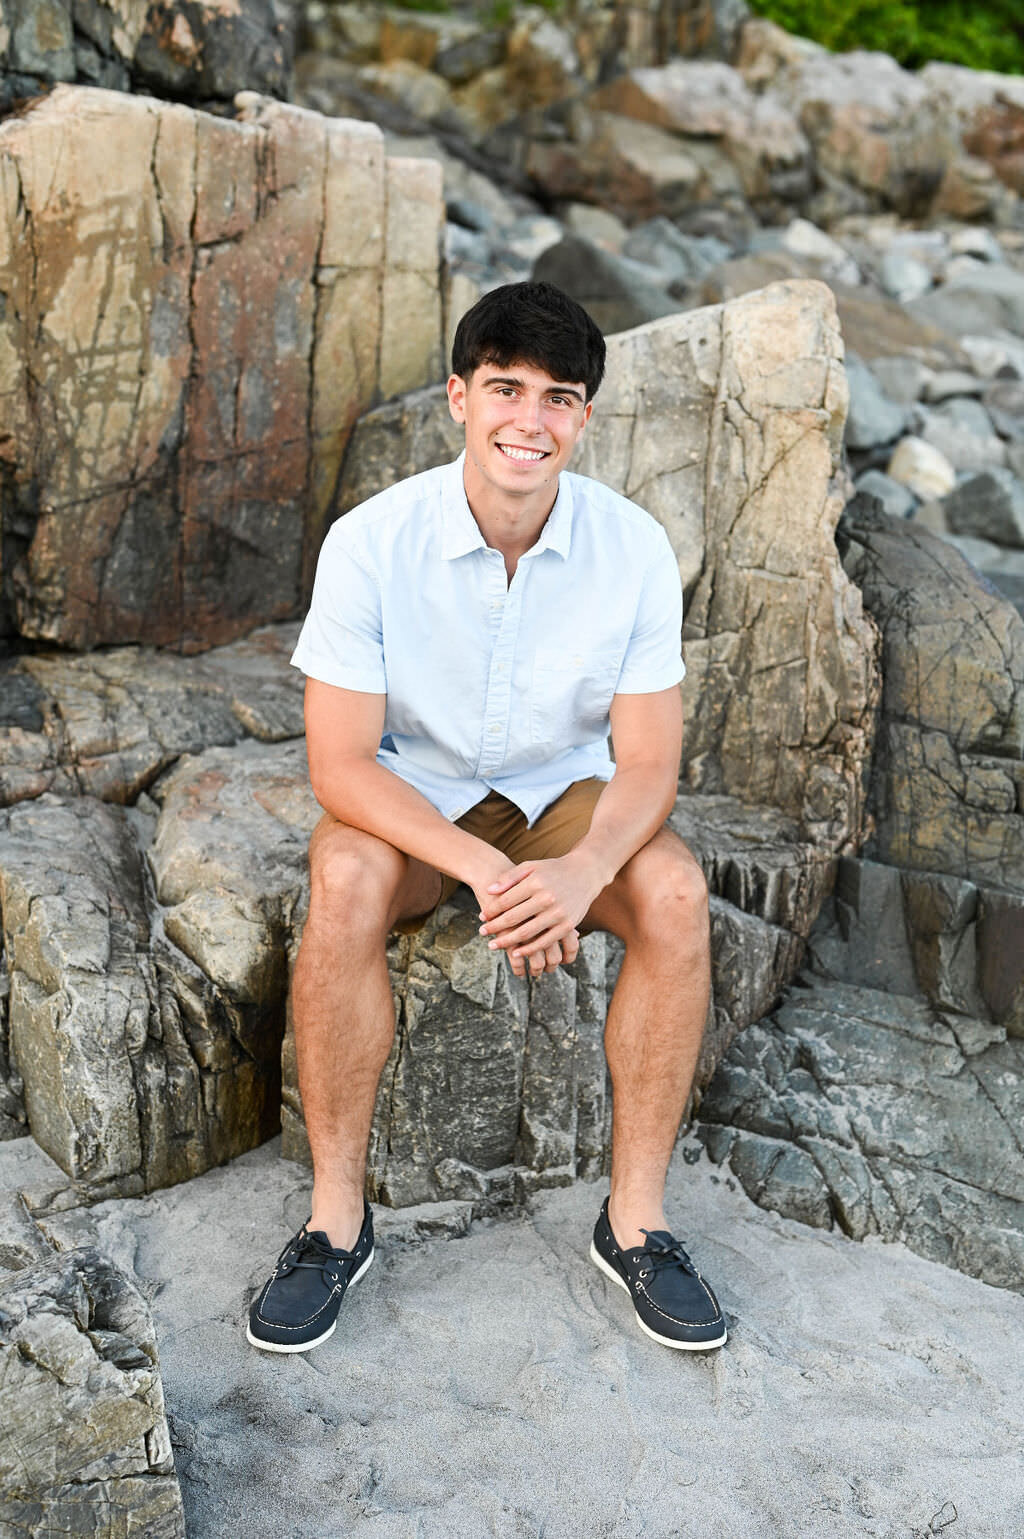 A boy smiling and sitting on rocks in the sand.